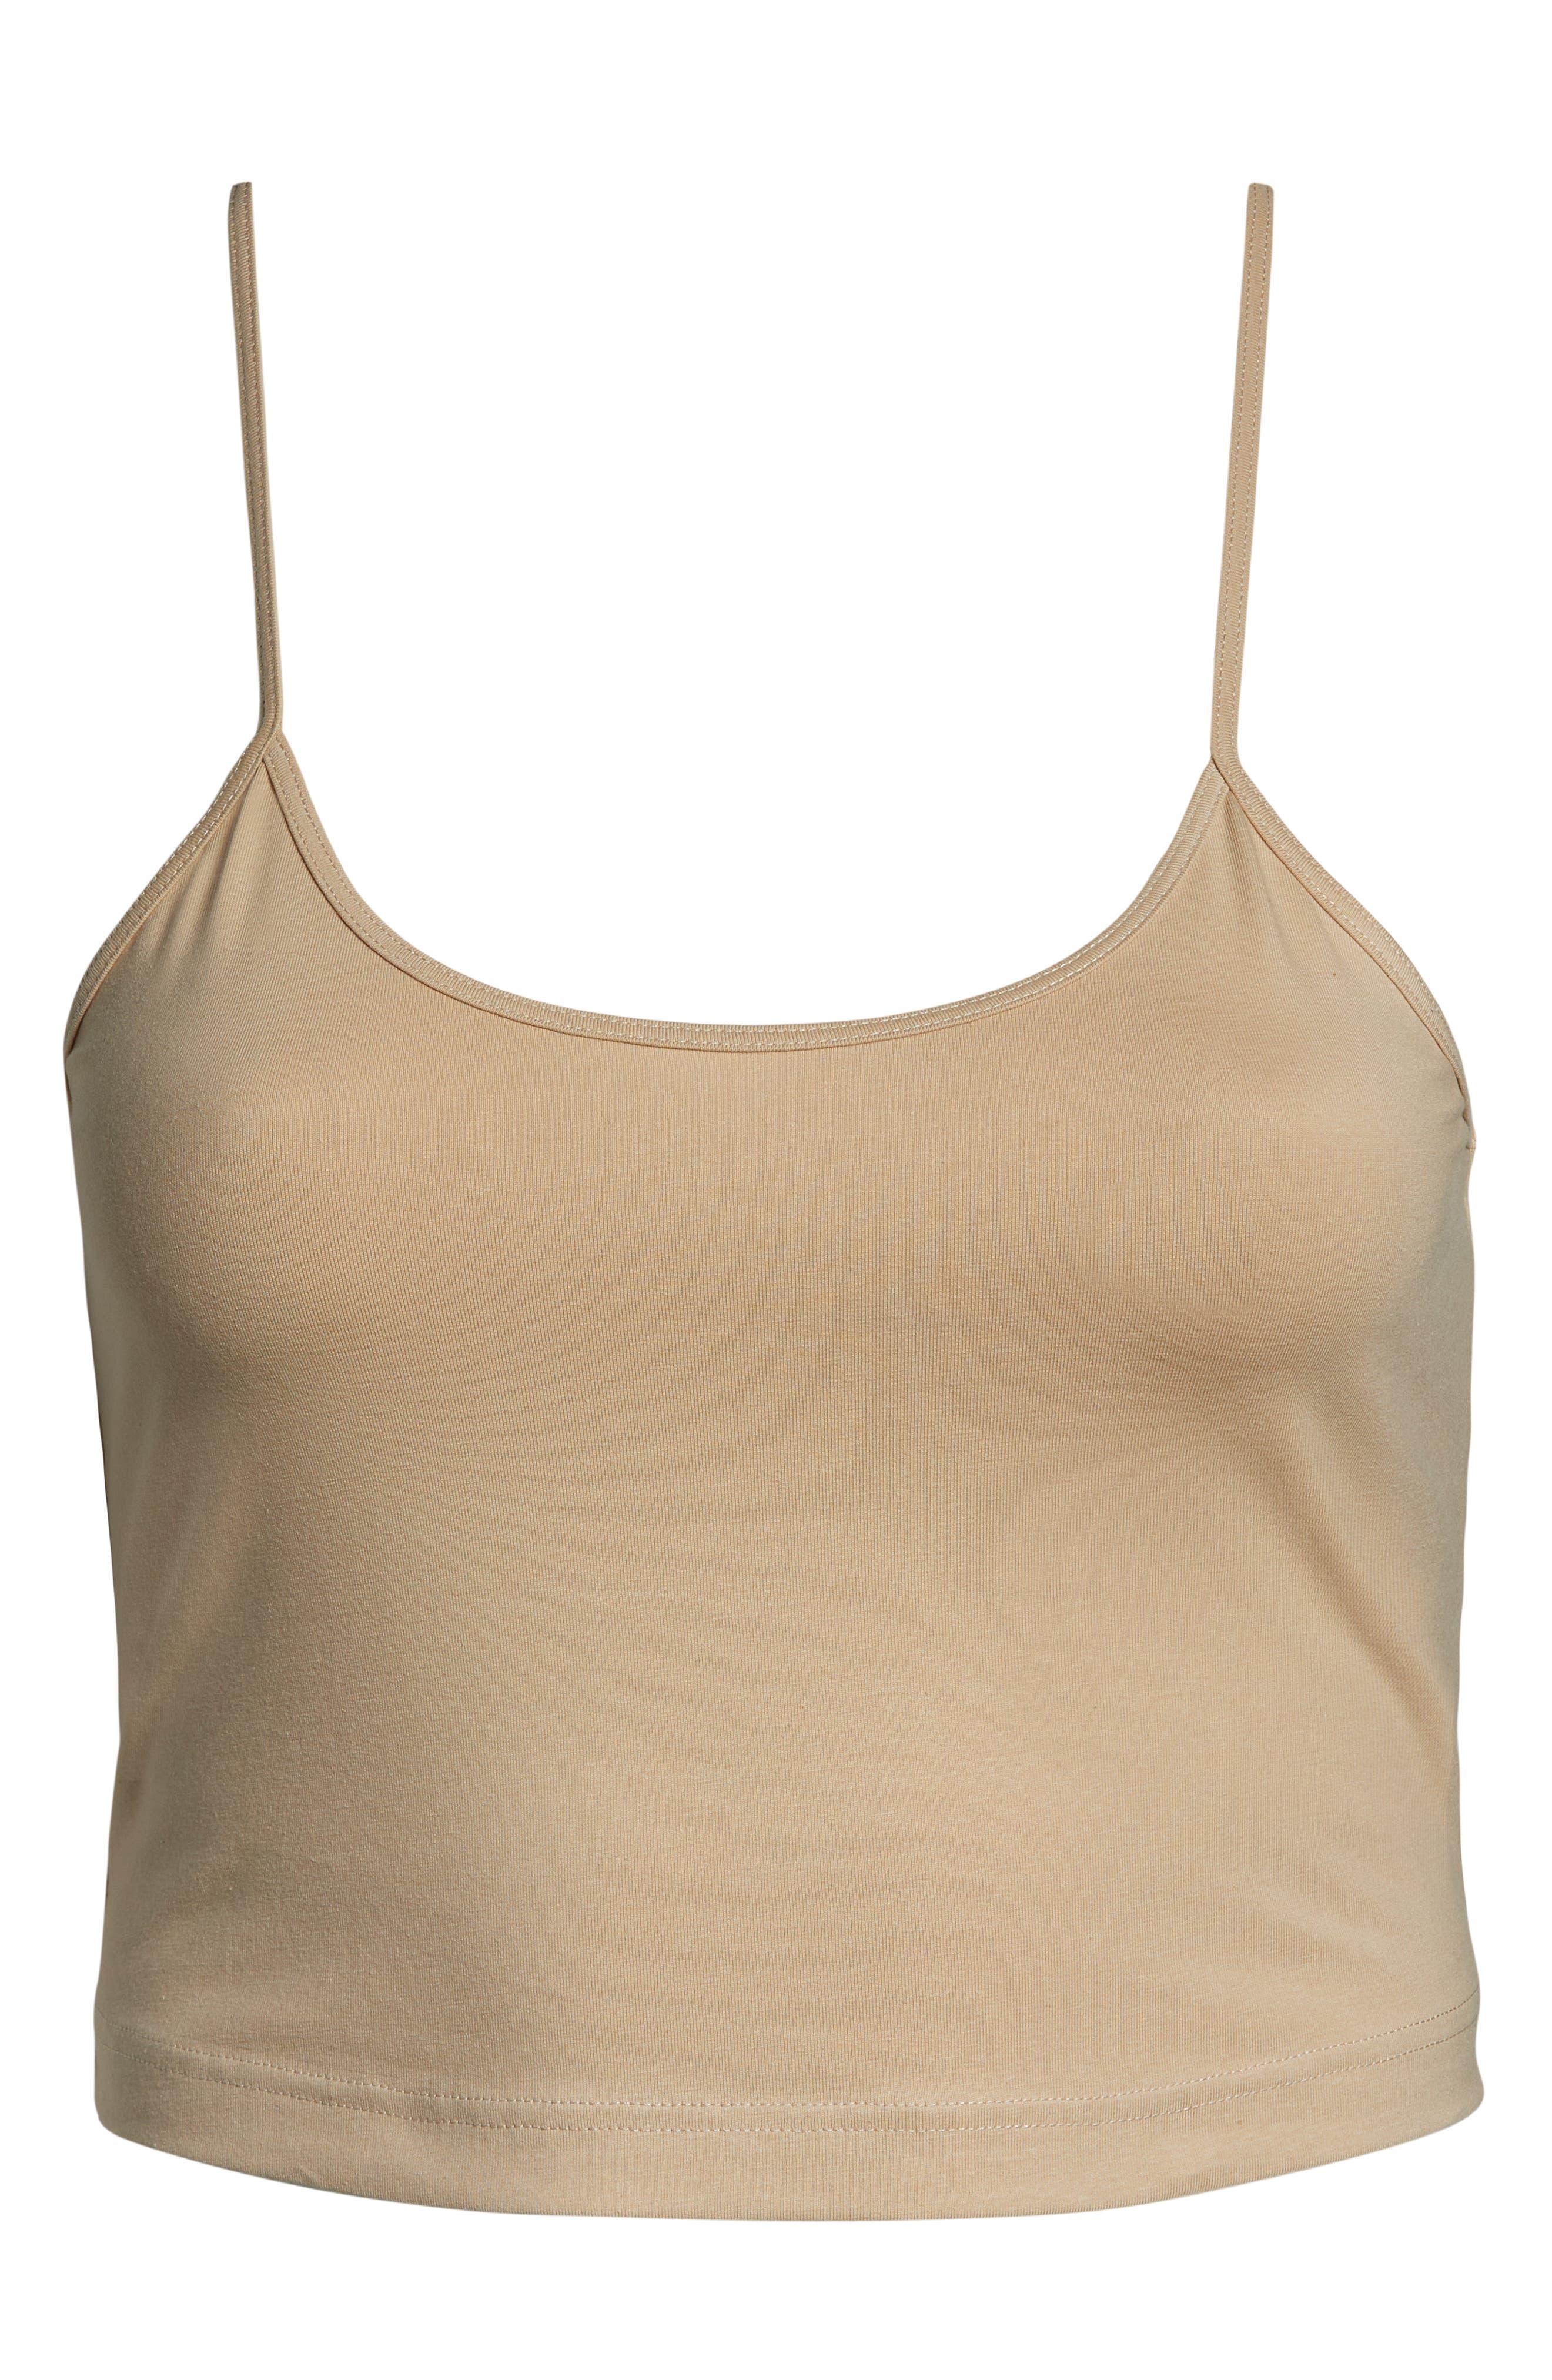 BP. Knit Organic Cotton Crop Camisole In Tan Doeskin At Nordstrom Rack in  Brown